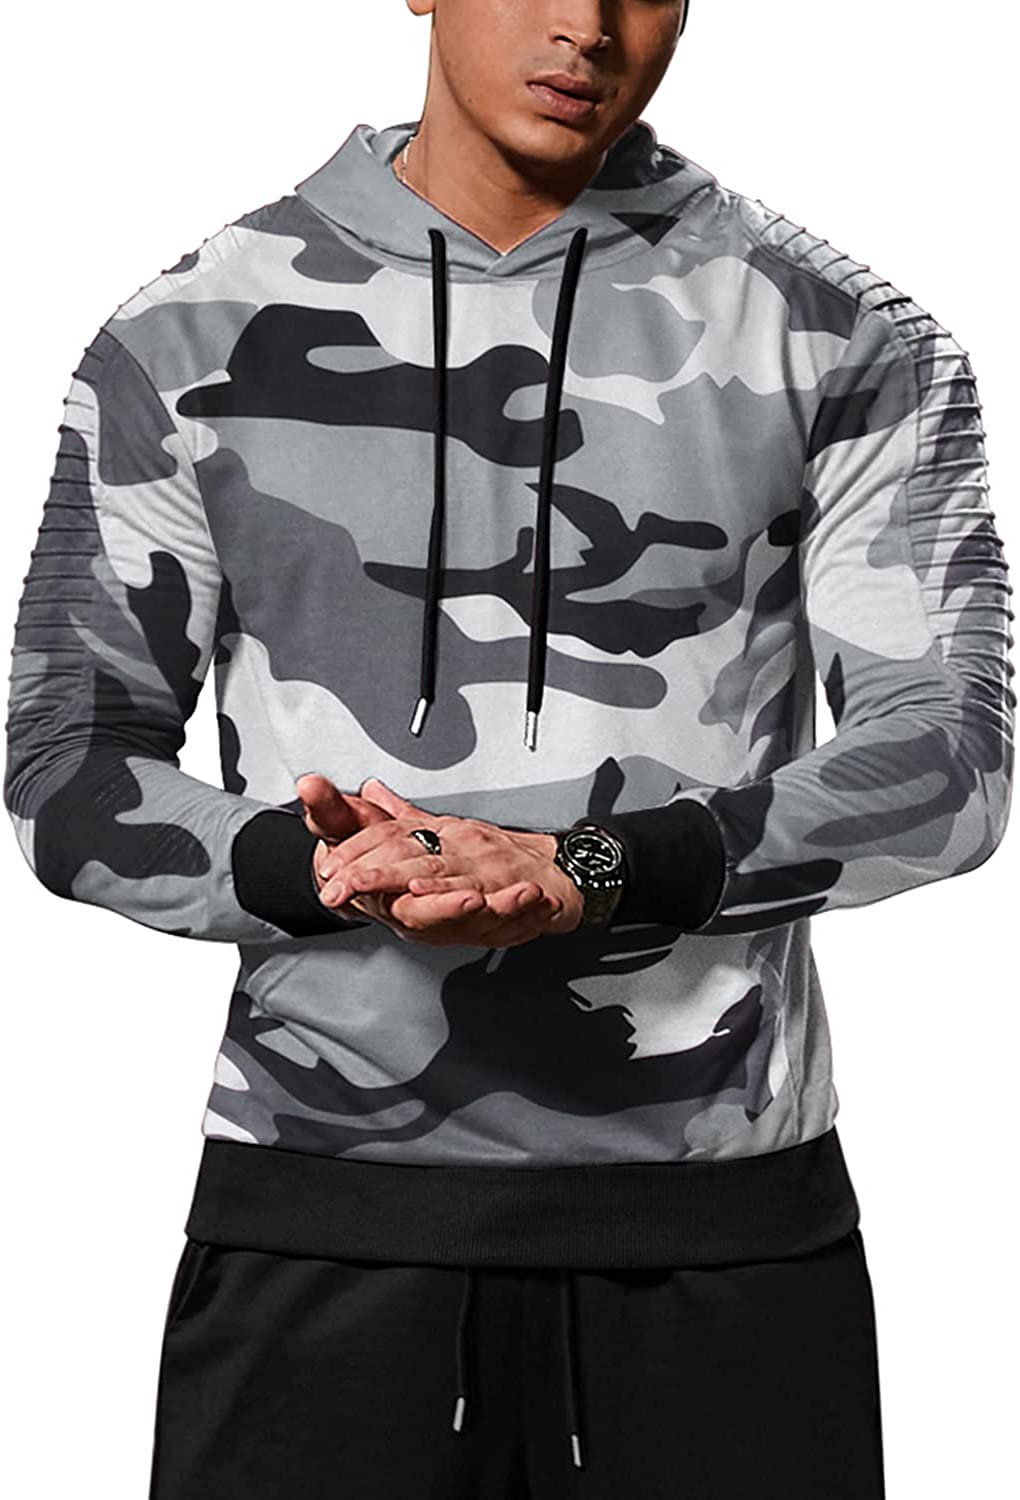 COOFANDY Men's Workout Hoodie Lightweight Gym Athletic Sweatshirt Fashion Pullover Hooded With Pocket Coofandy's Camouflage Small 